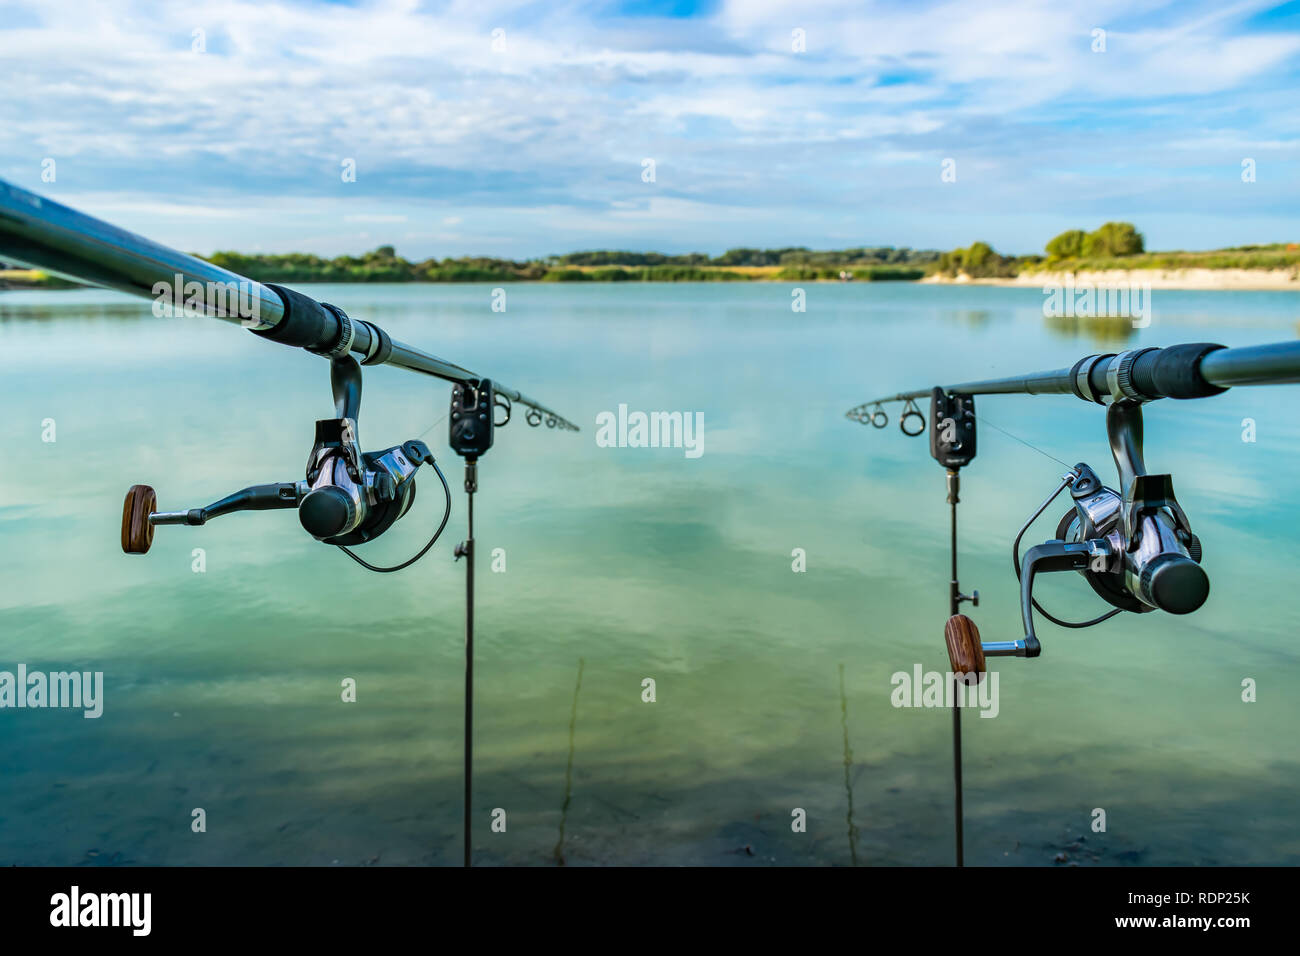 View of two fishing rods on stands with electronic lights on the